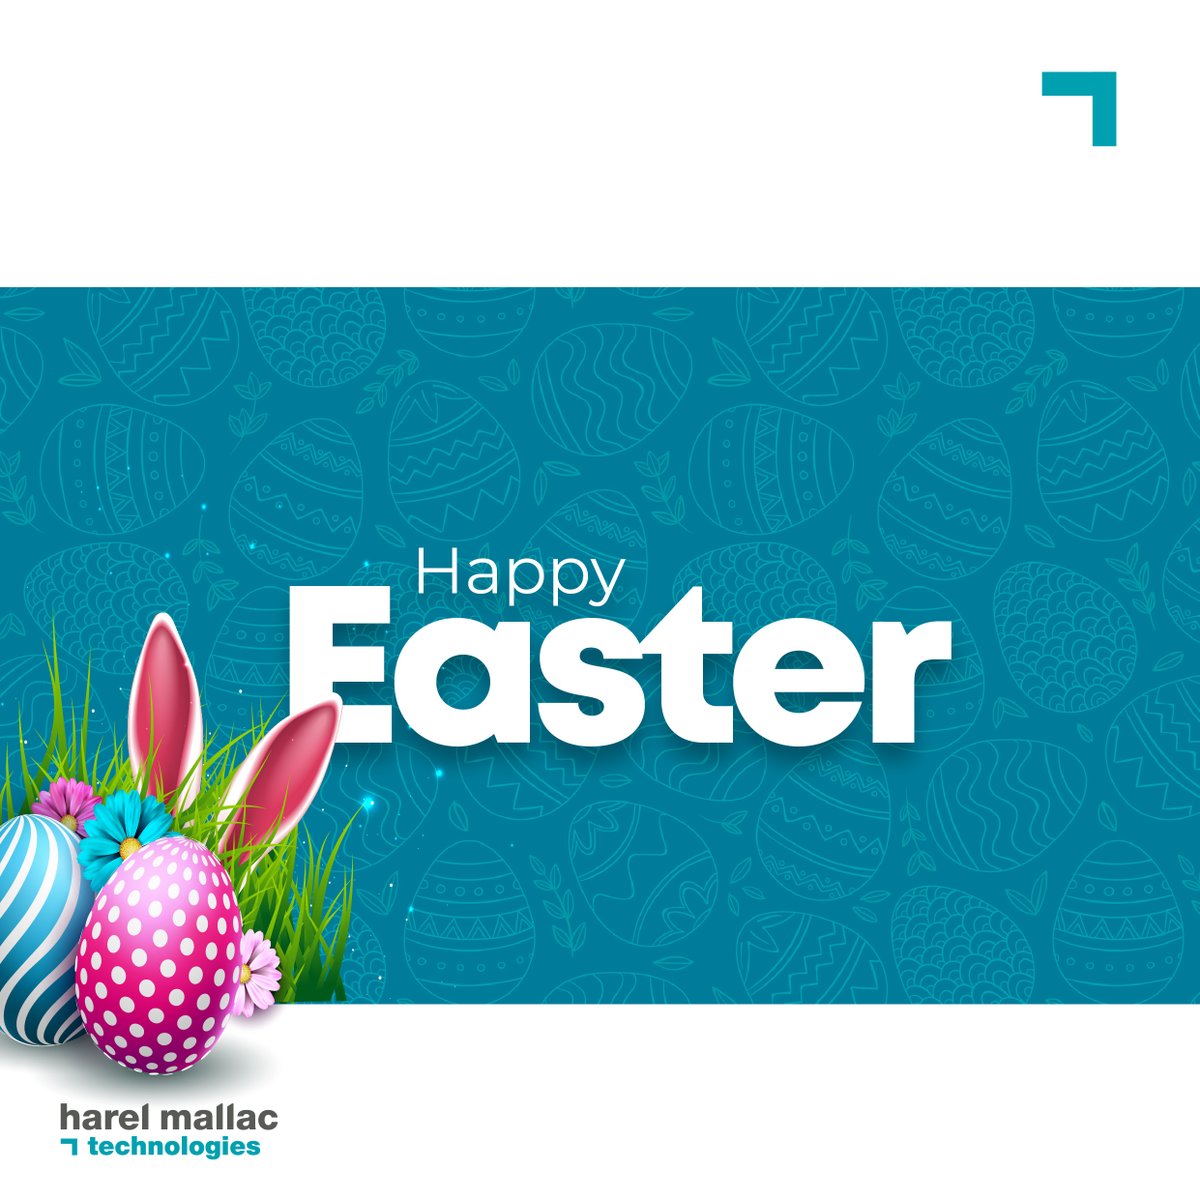 ✨ We wish you and your family a Happy Easter!

#HarelMallacTechnologies #Easter #Pâques #Mauritius #TogetherForBetter